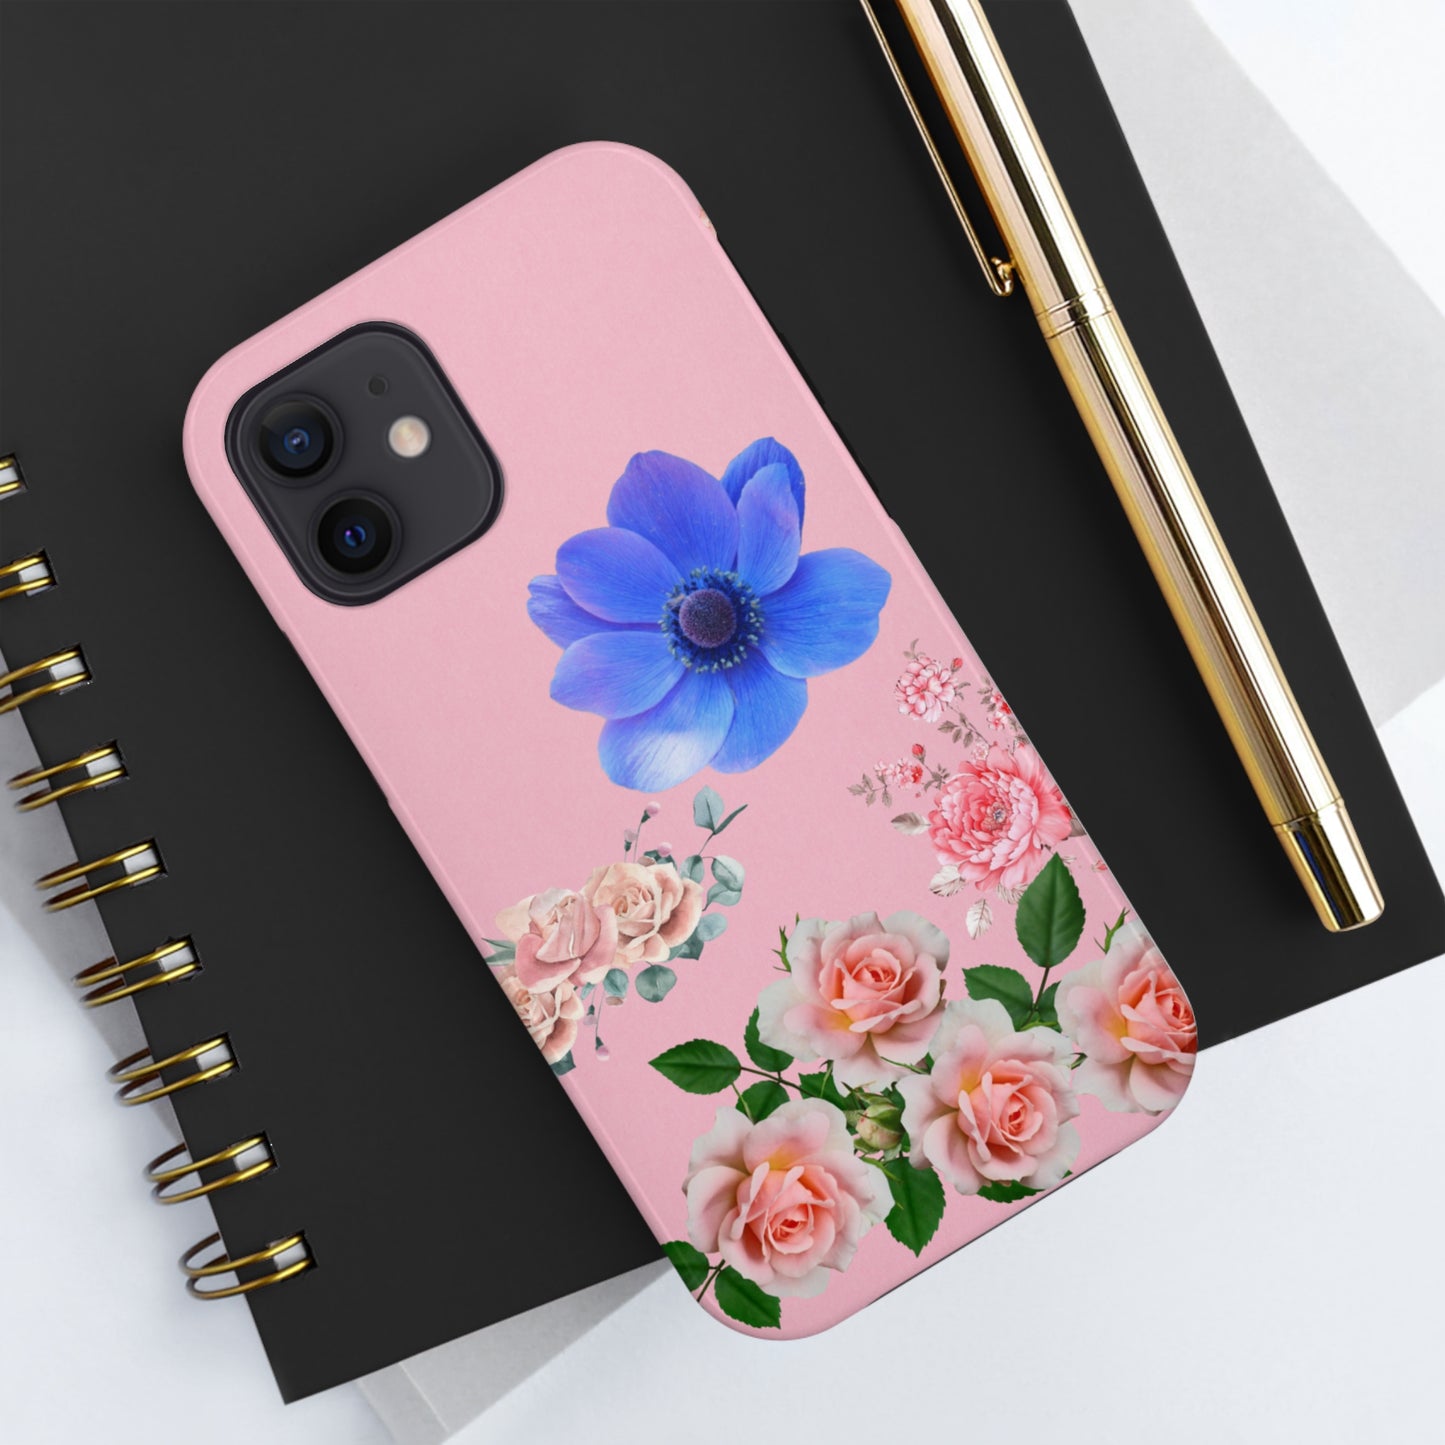 Make your iPhone shine: personalized cases with style